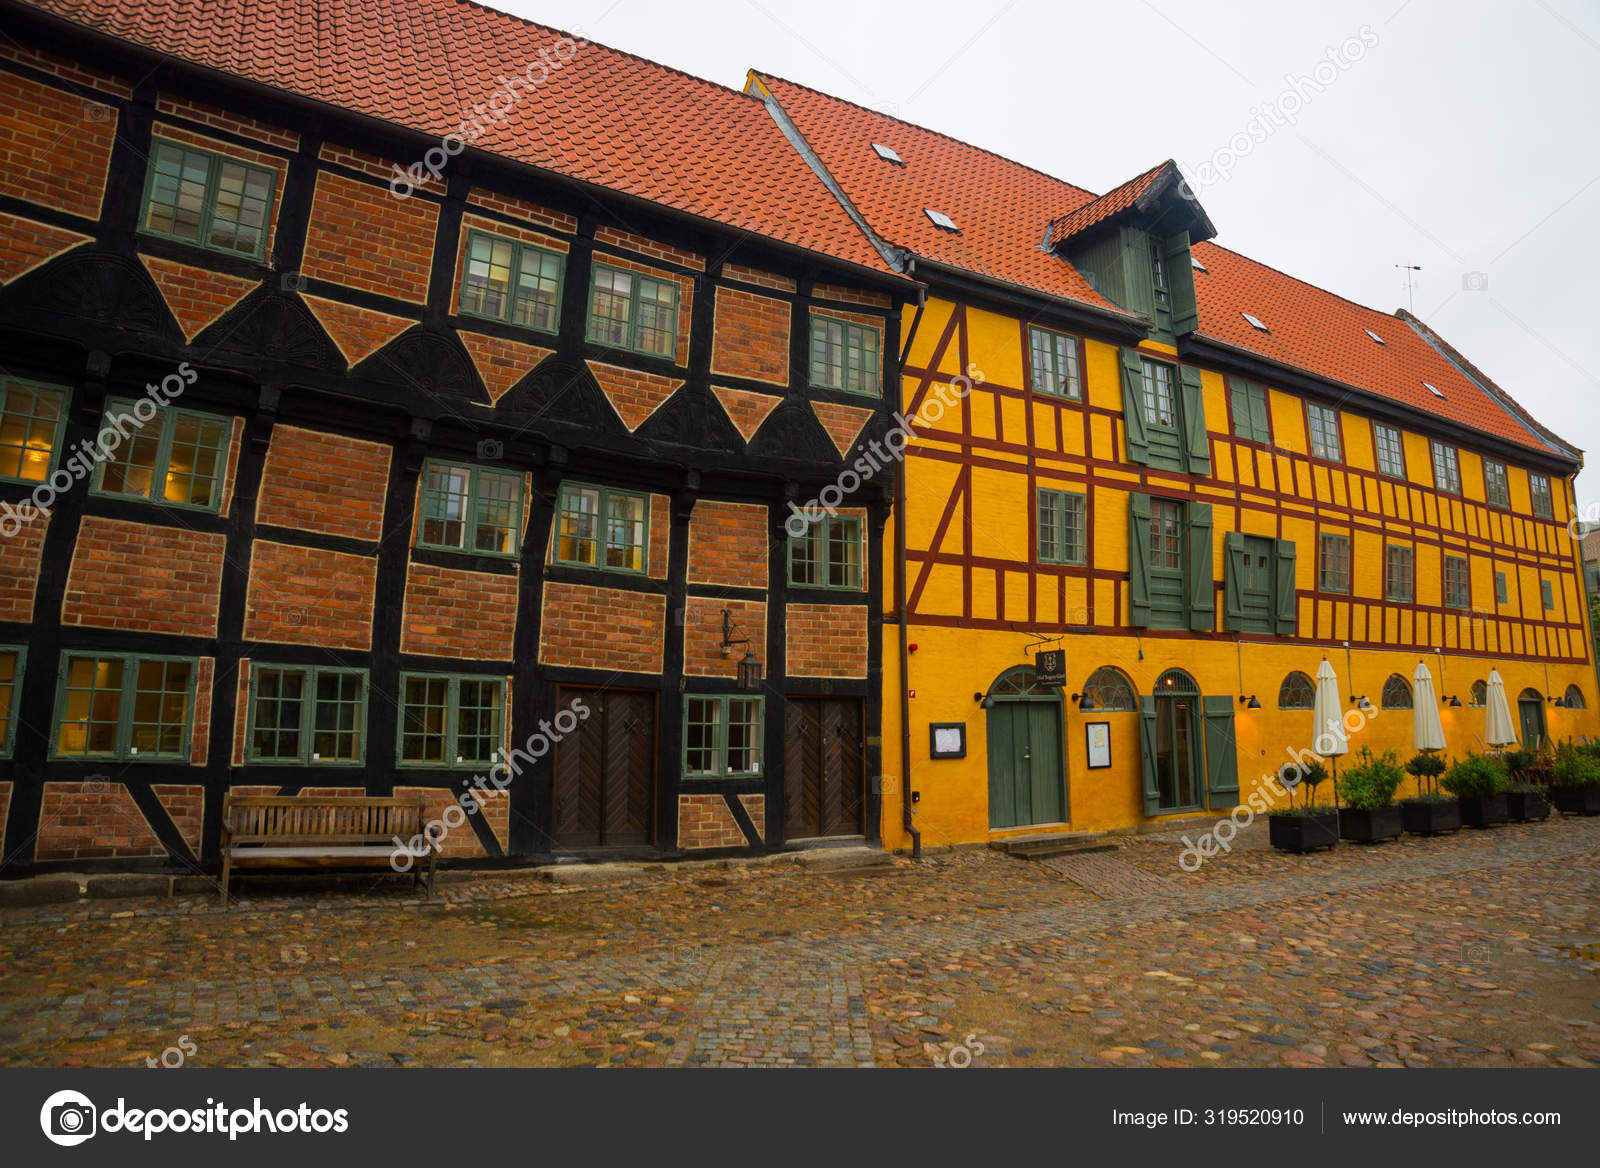 Odense Denmark Old Homes In Cobbled Streets In Odense The City Of Hans Christian Andersen Stock Photo By C A1804